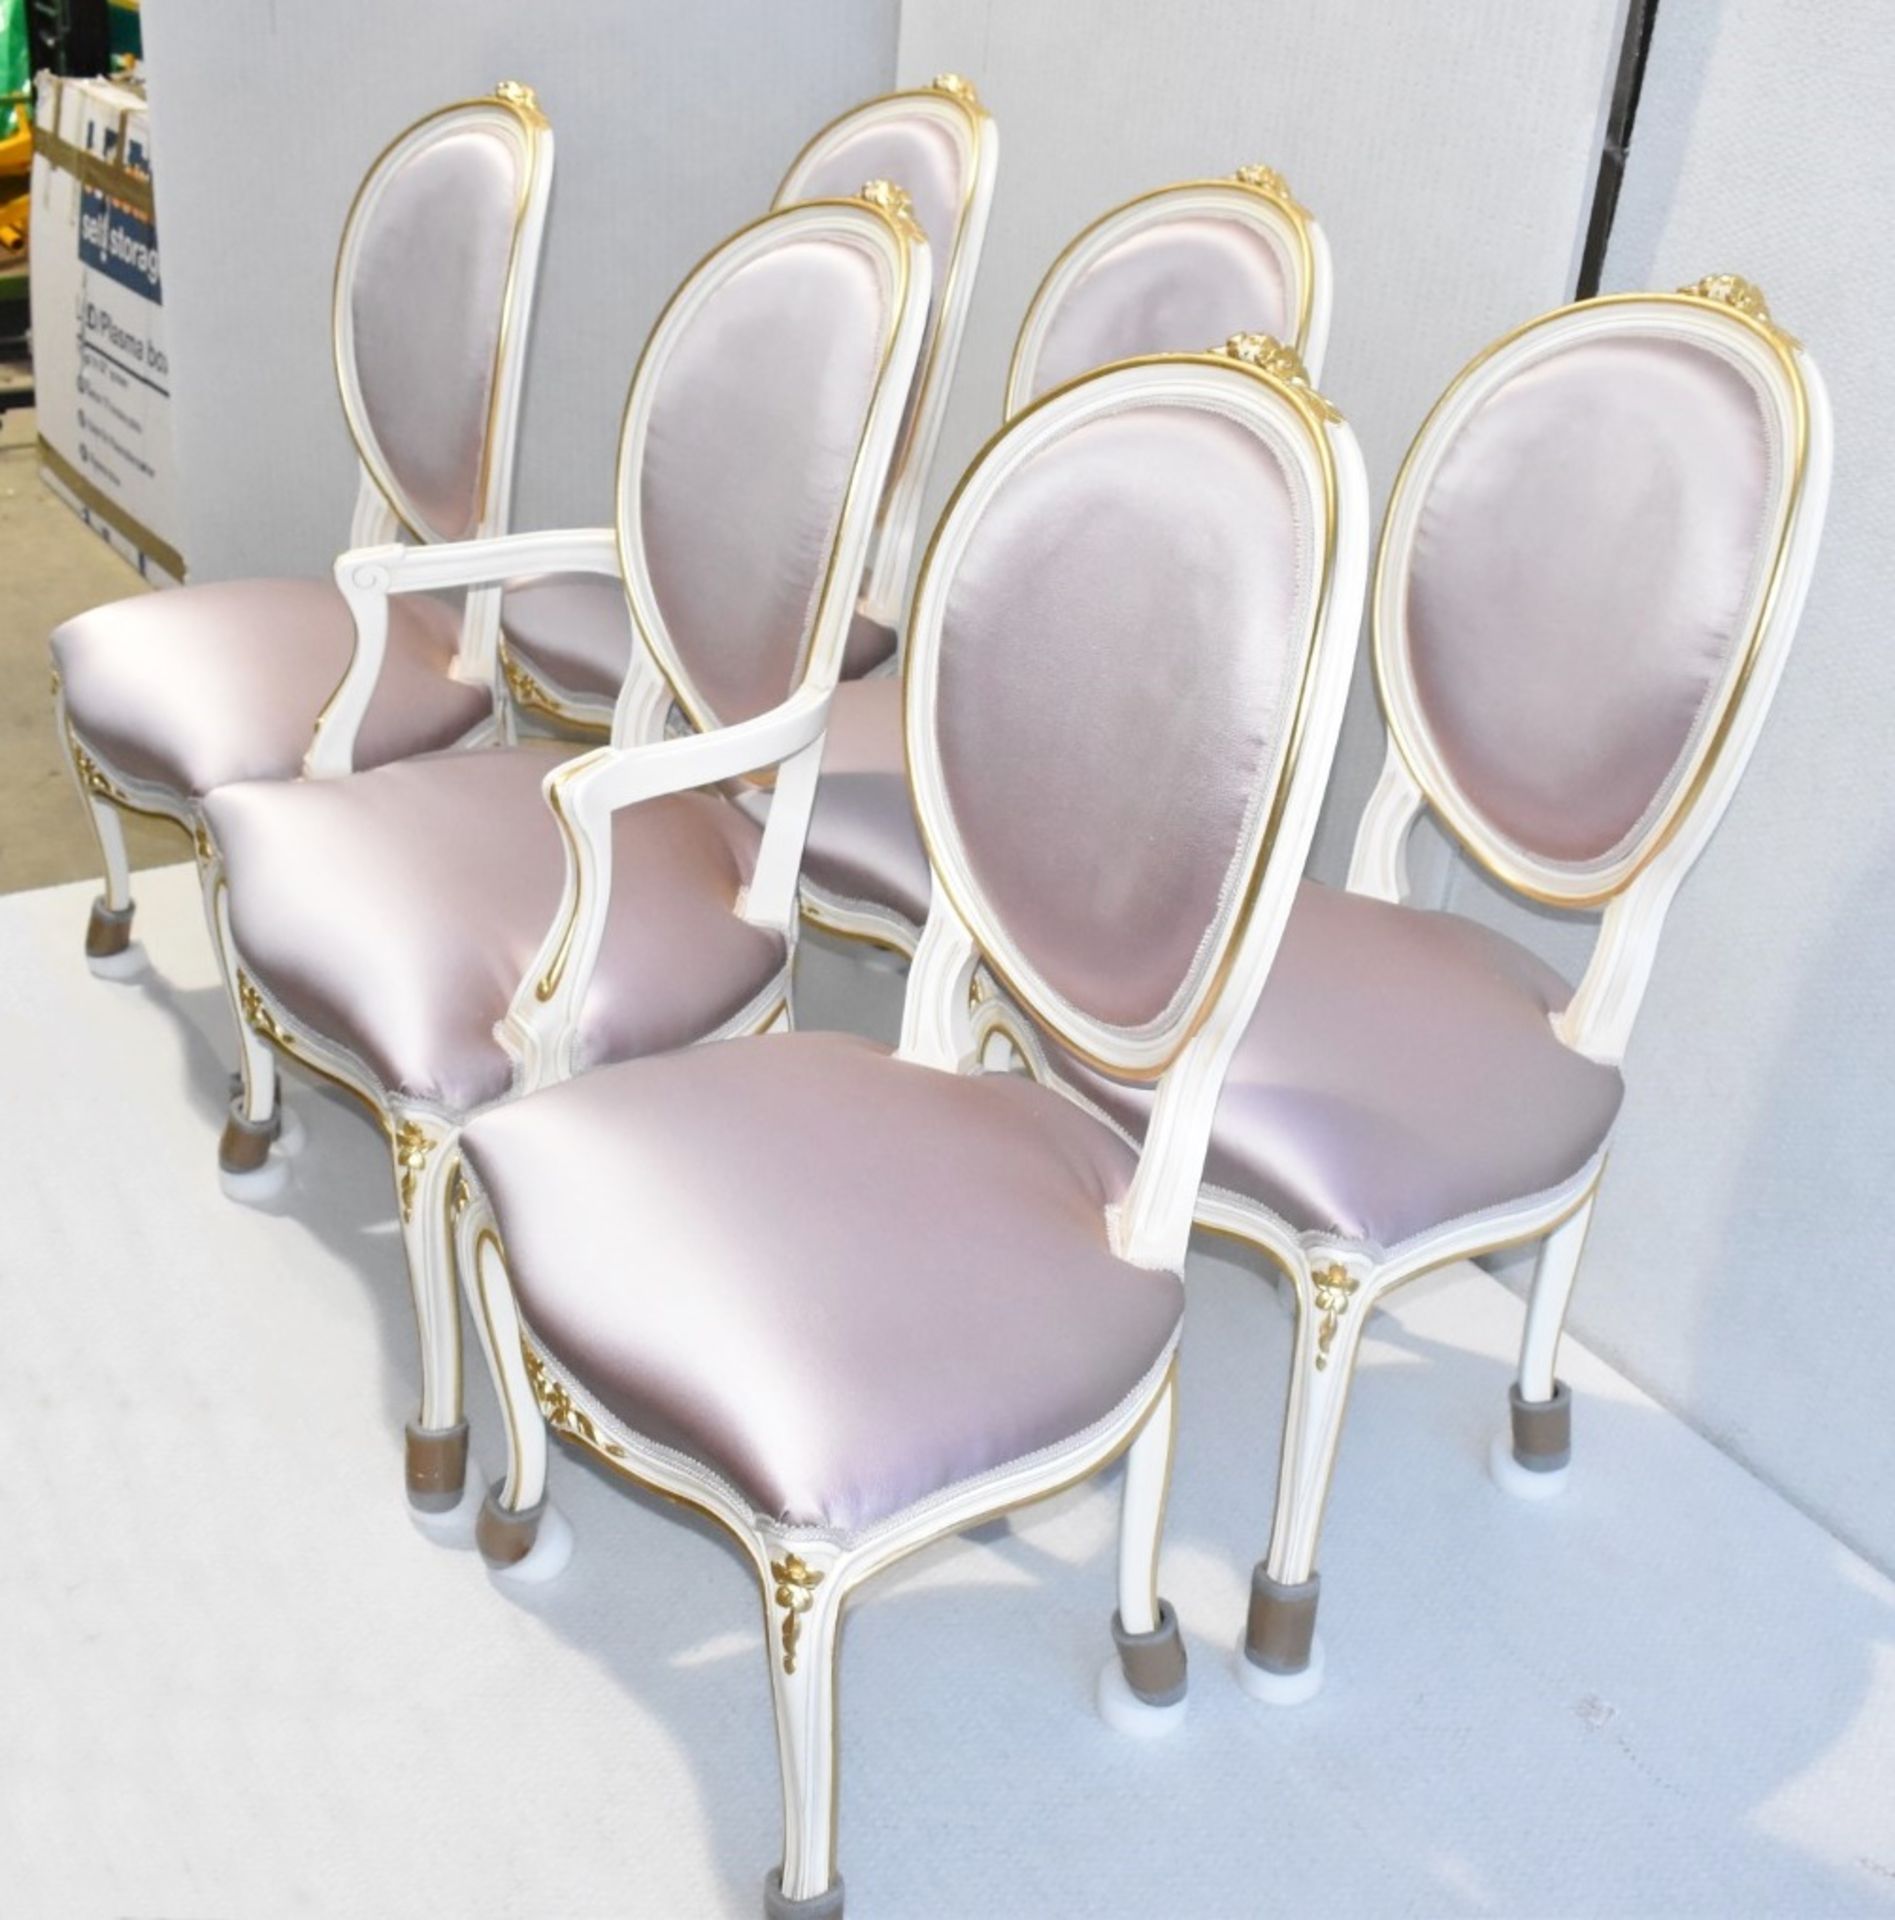 Set of 6 x ANGELO CAPPELLINI 'Timeless' Baroque-style Carved Dining Chairs, Upholstered in Pink Silk - Image 14 of 15